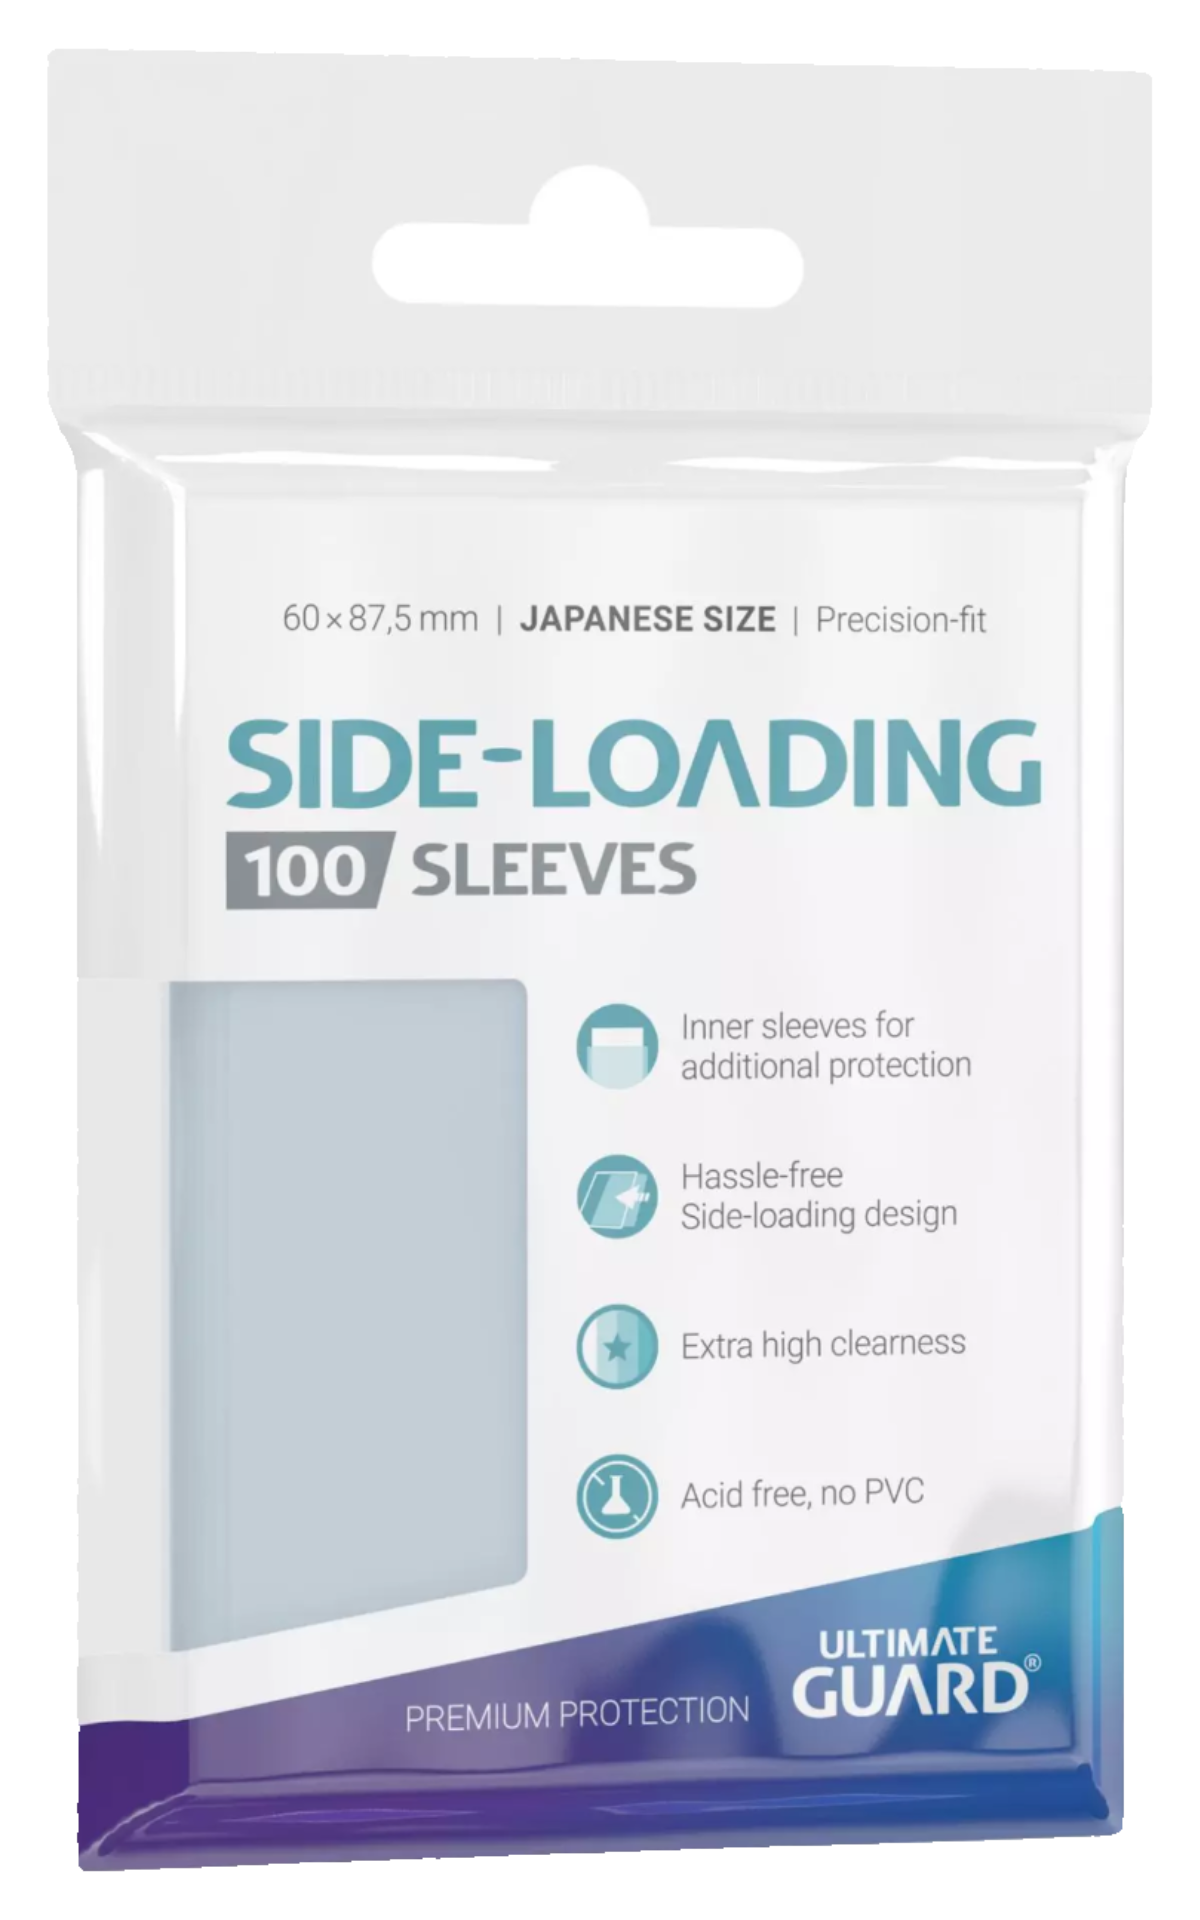 Ultimate Guard - Precise-Fit Sleeves - Japanese Size - Side-Loading - 100pk